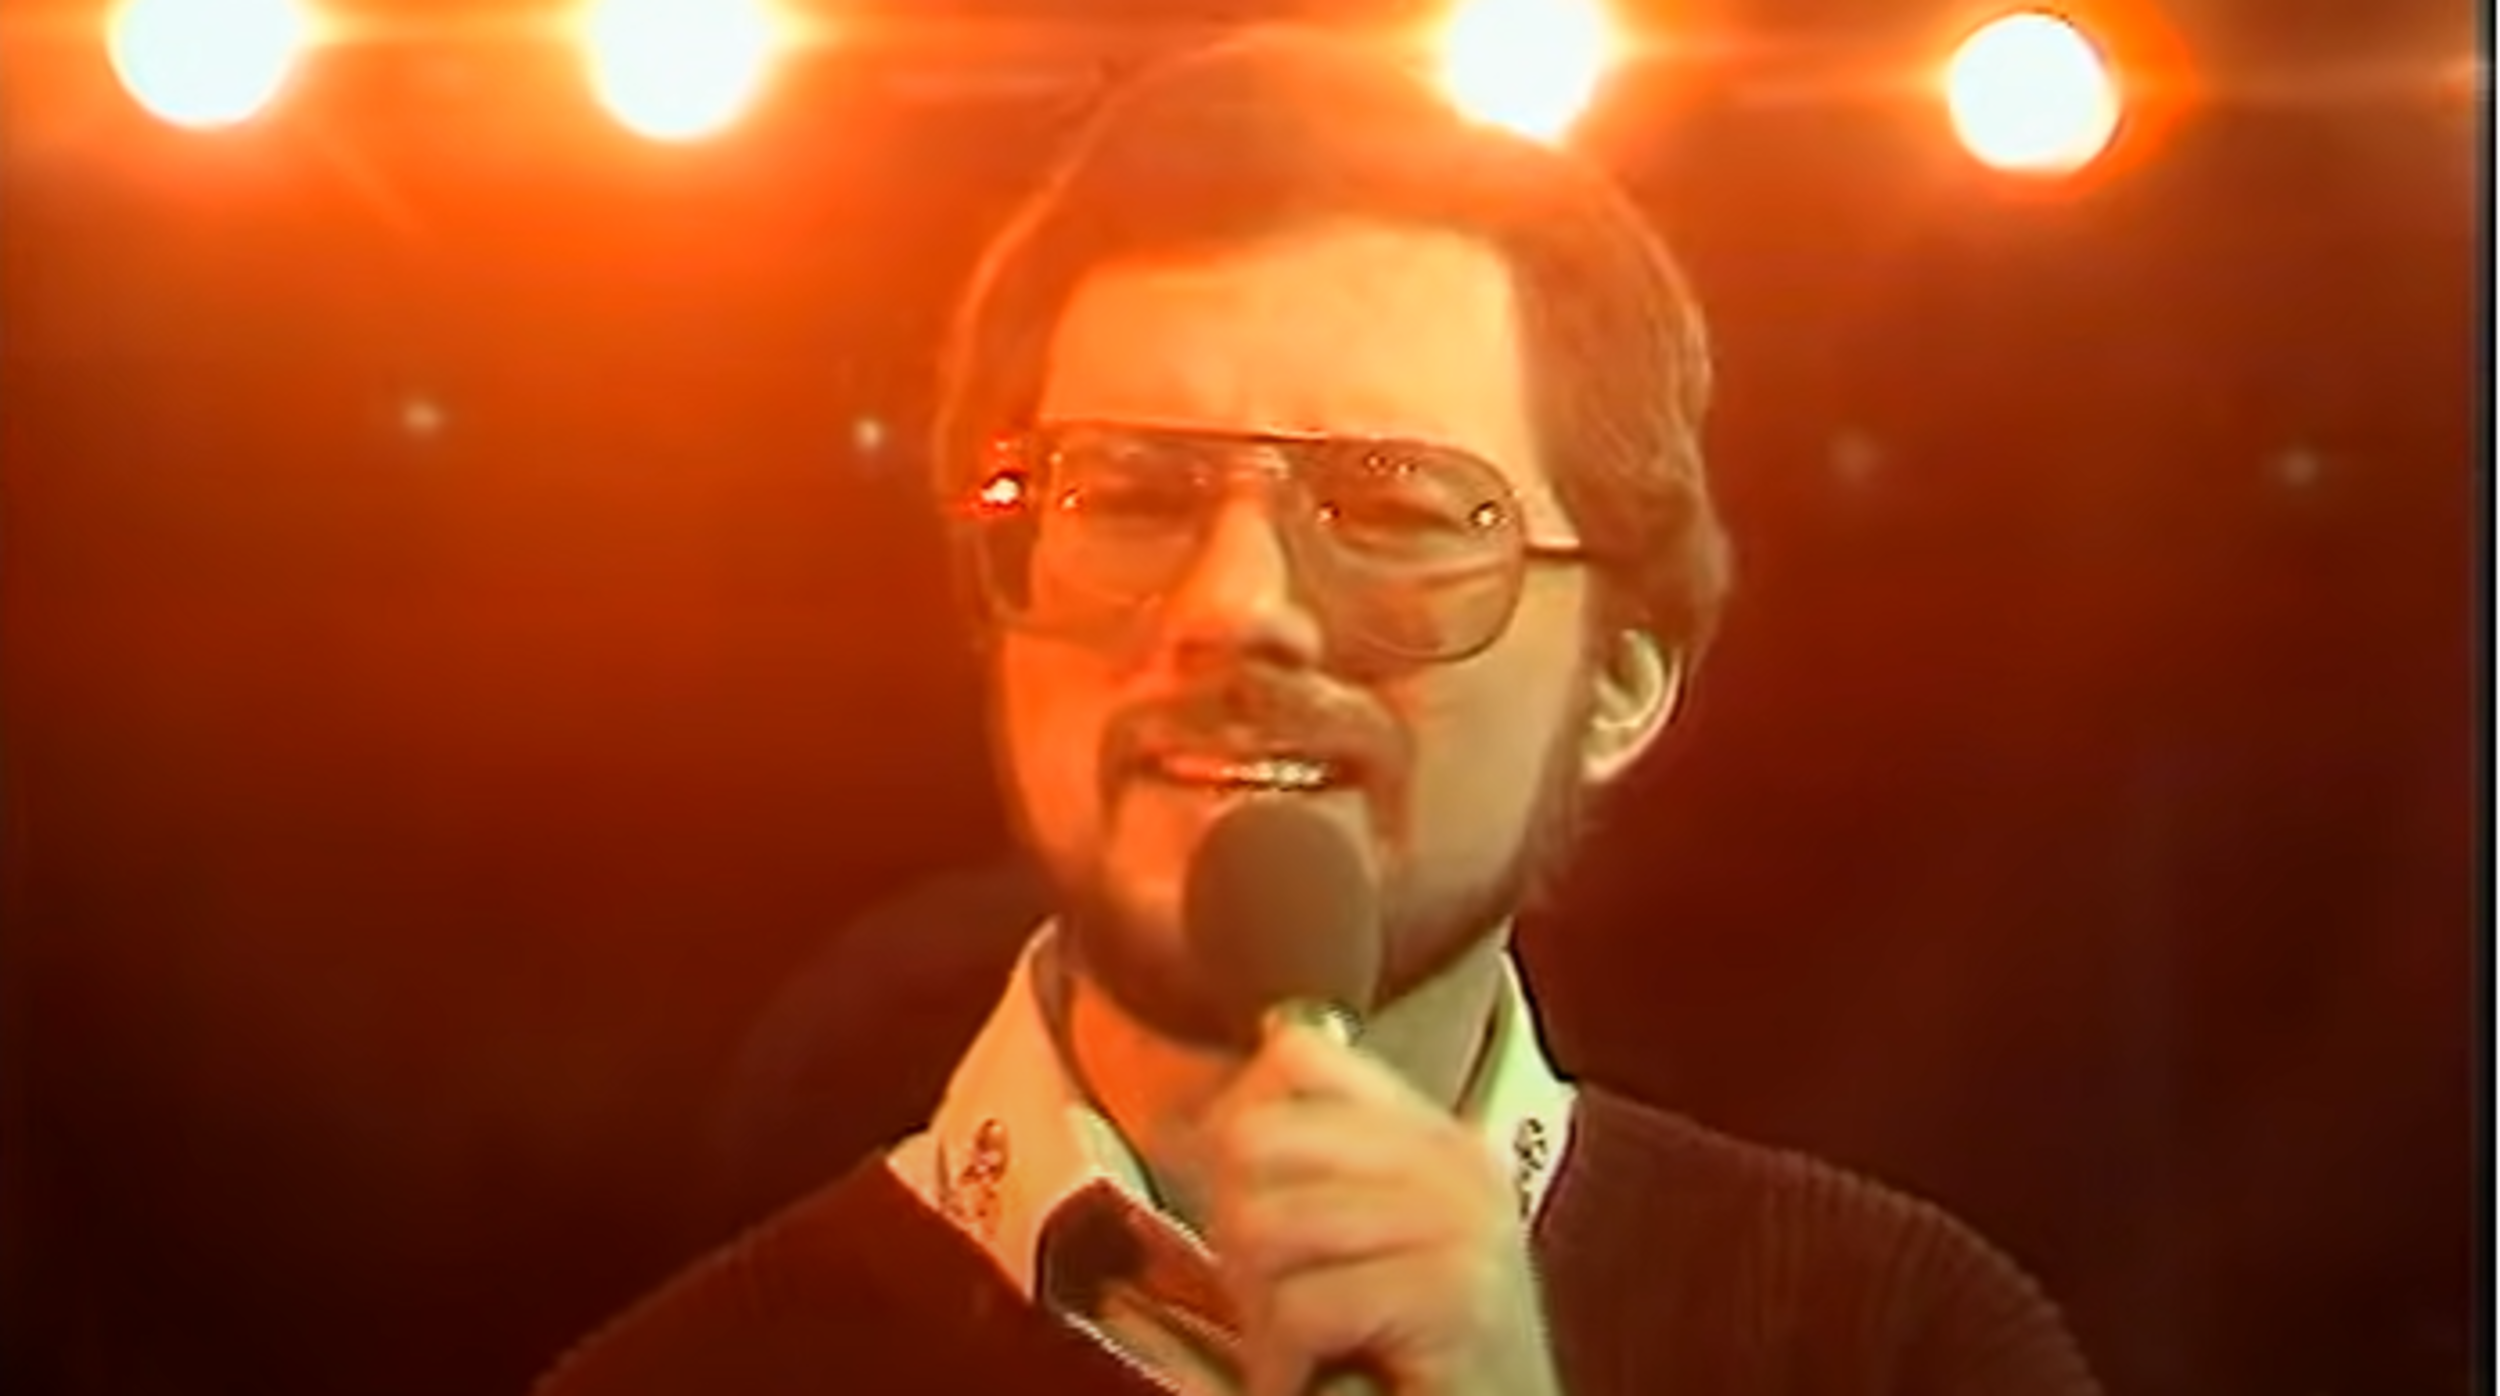 <p>This No.1 <em>Billboard</em> Hot 100 hit for England's Rupert Holmes has achieved a steady cult following over the years. Perhaps, because of the unique title and conjured images of some warm, beach-laden paradise. Yacht rock's association with summer, water, and care-free living, as a backdrop to a romantic story, is one of its appealing aspects. This <a href="https://www.youtube.com/watch?v=zROIlspgOjM">song is about a couple who ultimately patch up a rough relationship through personal ads</a>. Any time somebody of a certain age sips one of these drinks, ideally at some Caribbean resort with the warm winds off the ocean blowing, "The Pina Colada Song" should come to mind.</p><p>You may also like: <a href='https://www.yardbarker.com/entertainment/articles/the_25_greatest_jimmy_stewart_films/s1__30264611'>The 25 greatest Jimmy Stewart films</a></p>